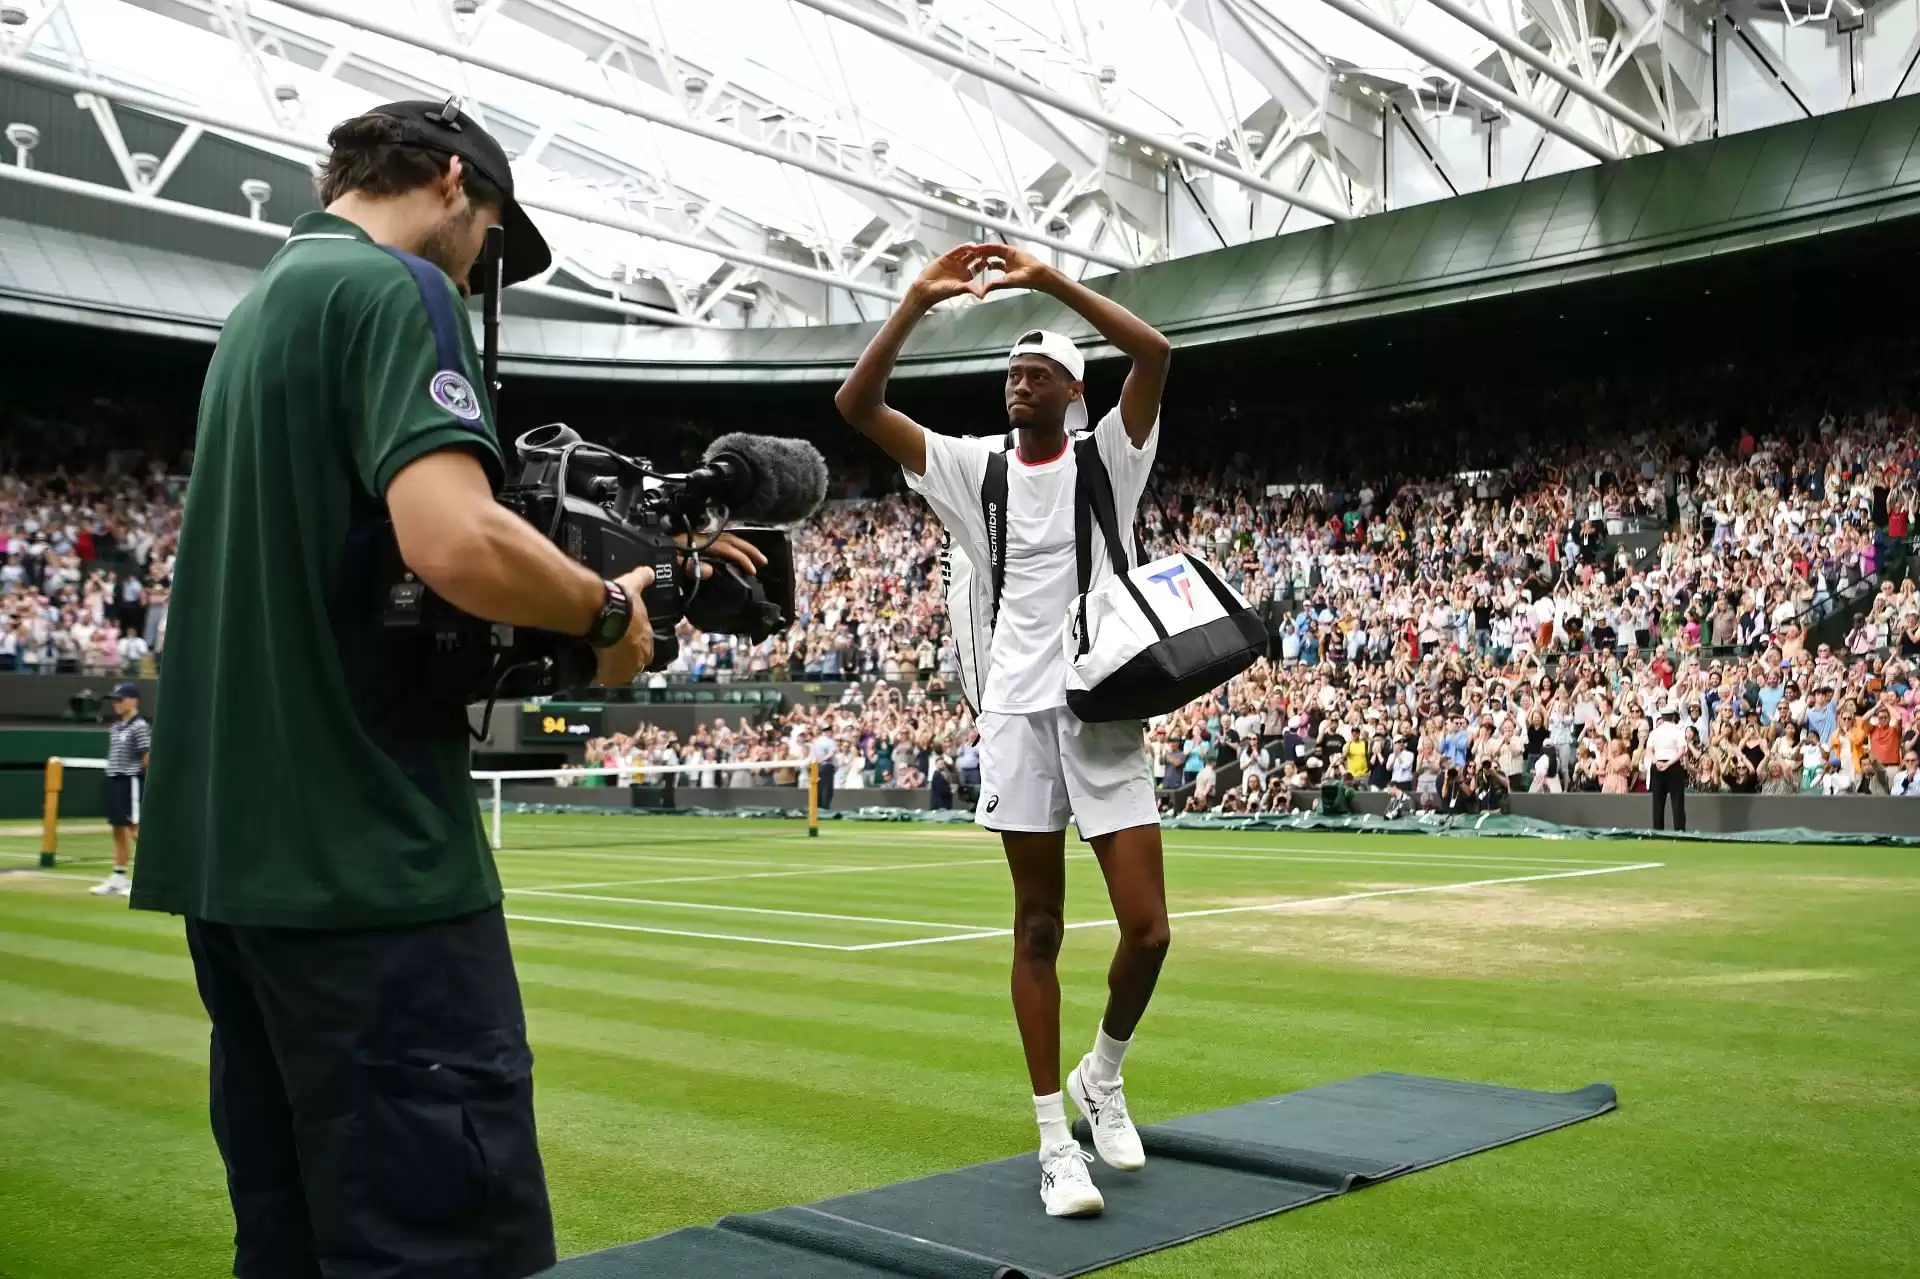 Christopher Eubanks playfully teases Coco Gauff for snacking during American's Wimbledon quarterfinal against Daniil Medvedev.